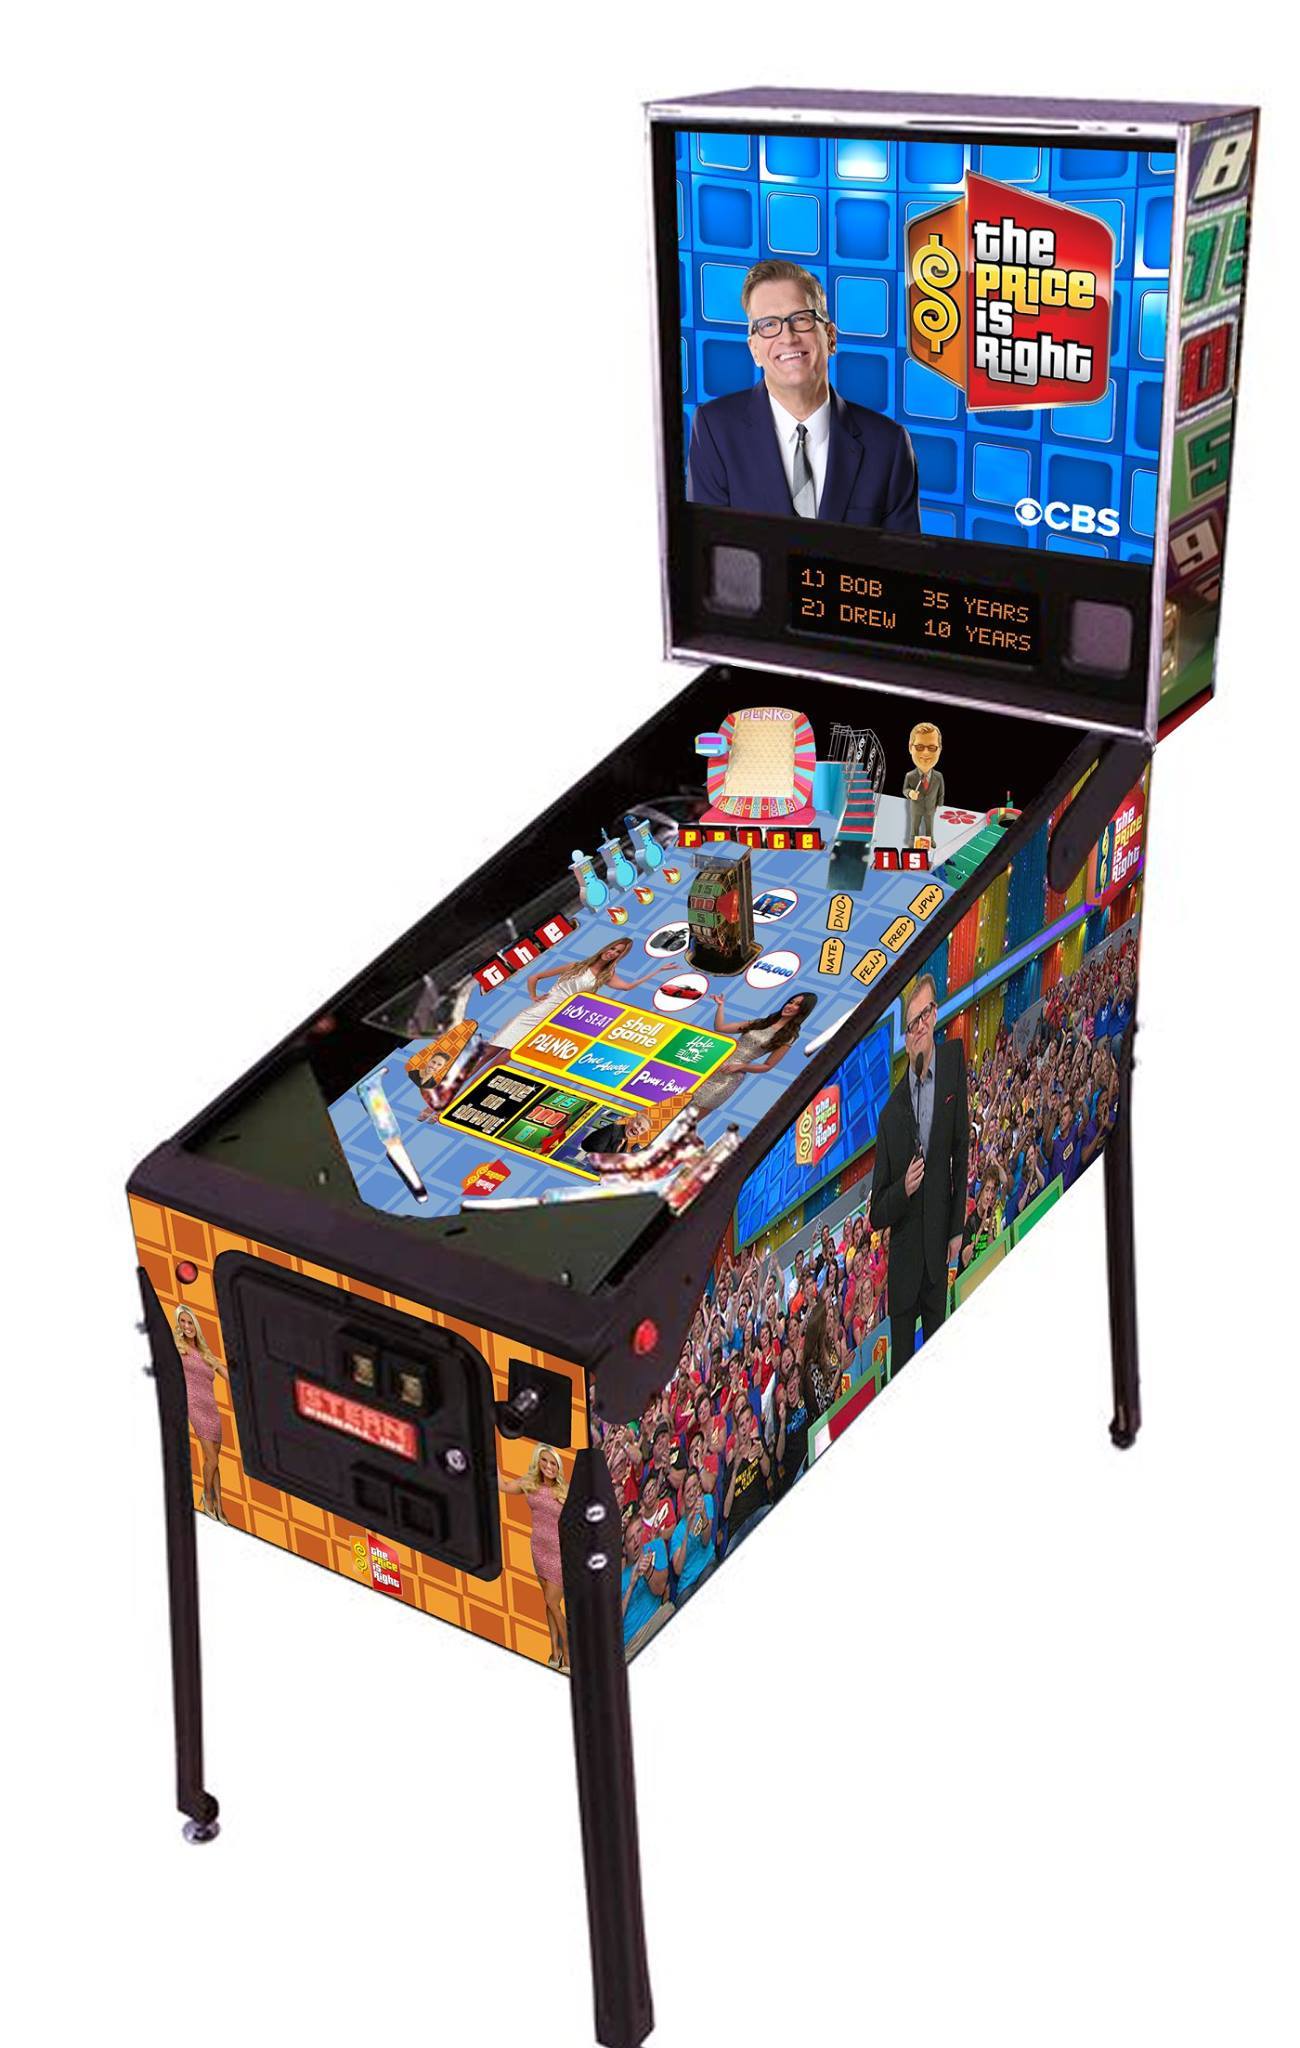 Pic of the day: (NOT) The Price is Right pinball